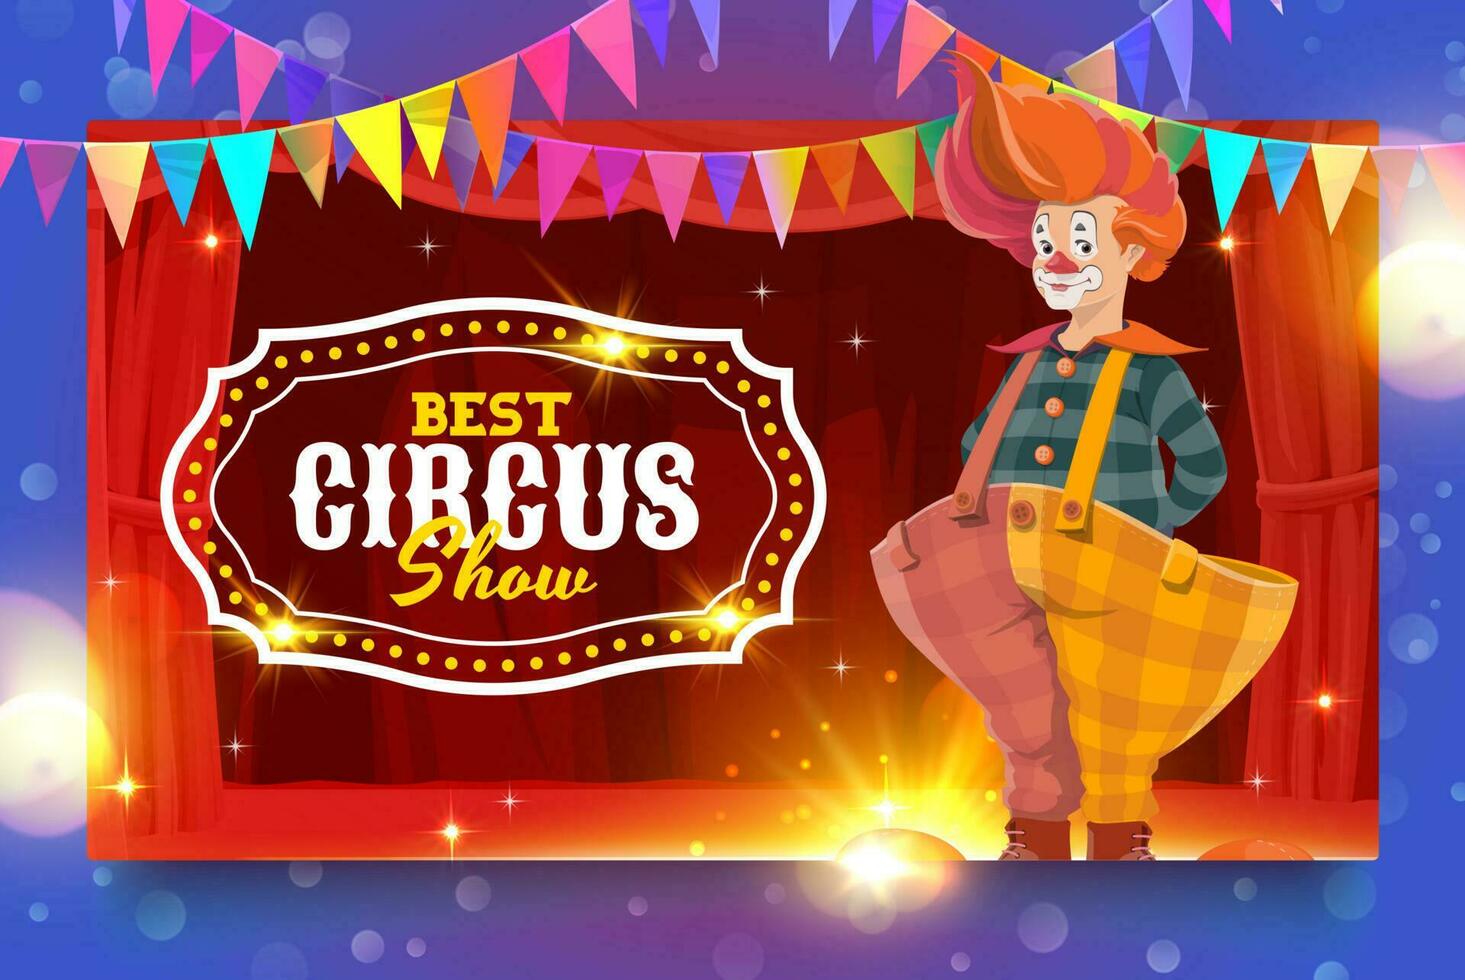 Shapito circus cartoon clown in trousers on stage vector